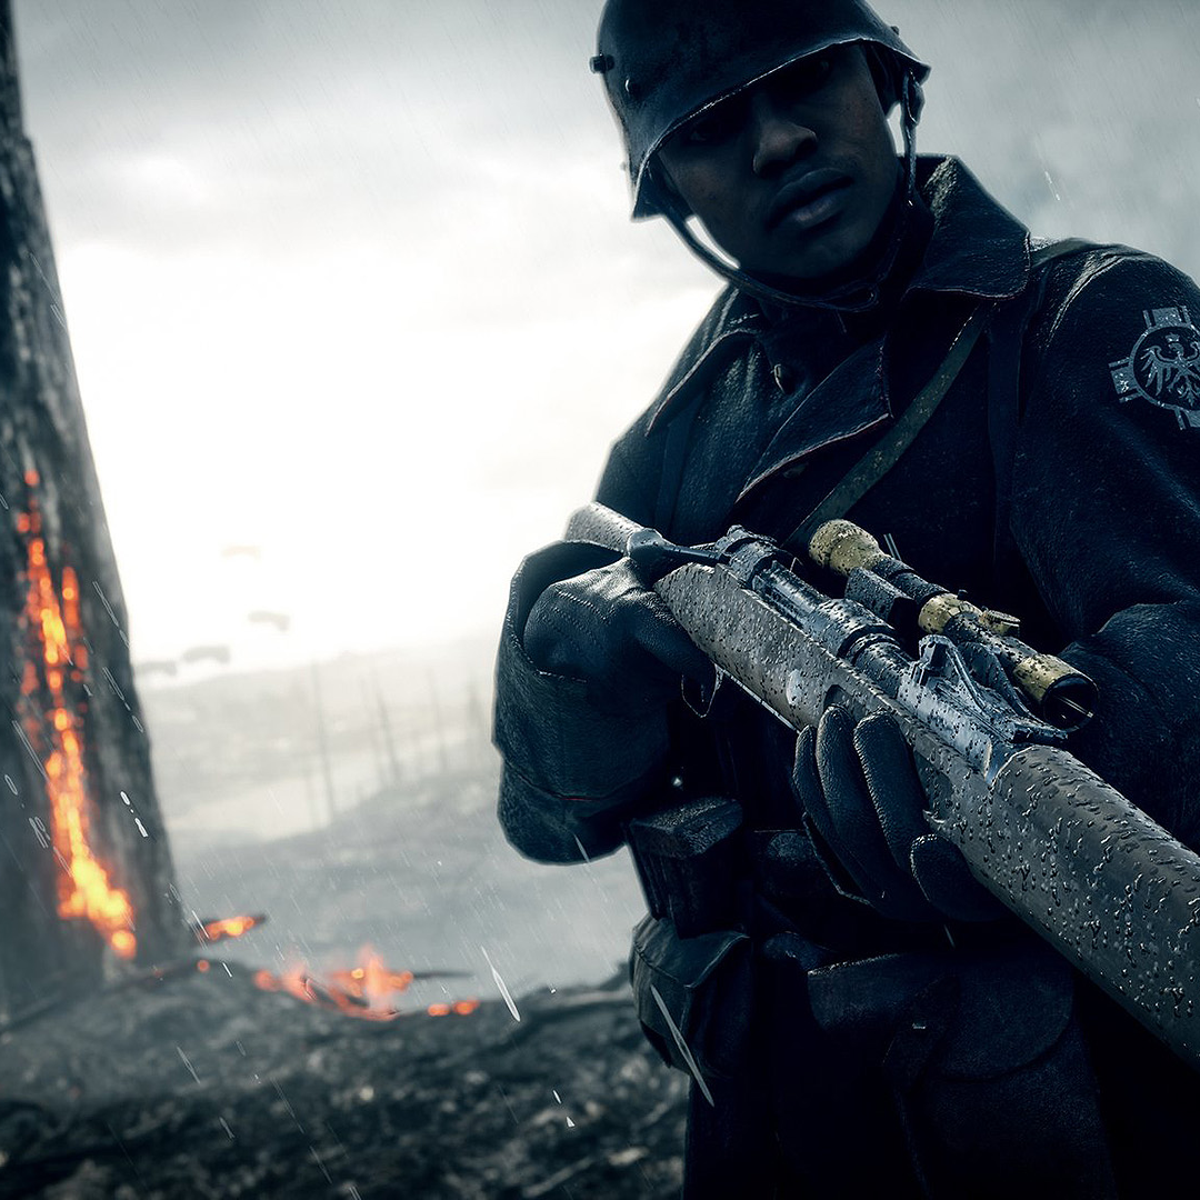 Back to Basics is the game mode Battlefield 1 players have been asking for  since launch - gameplay